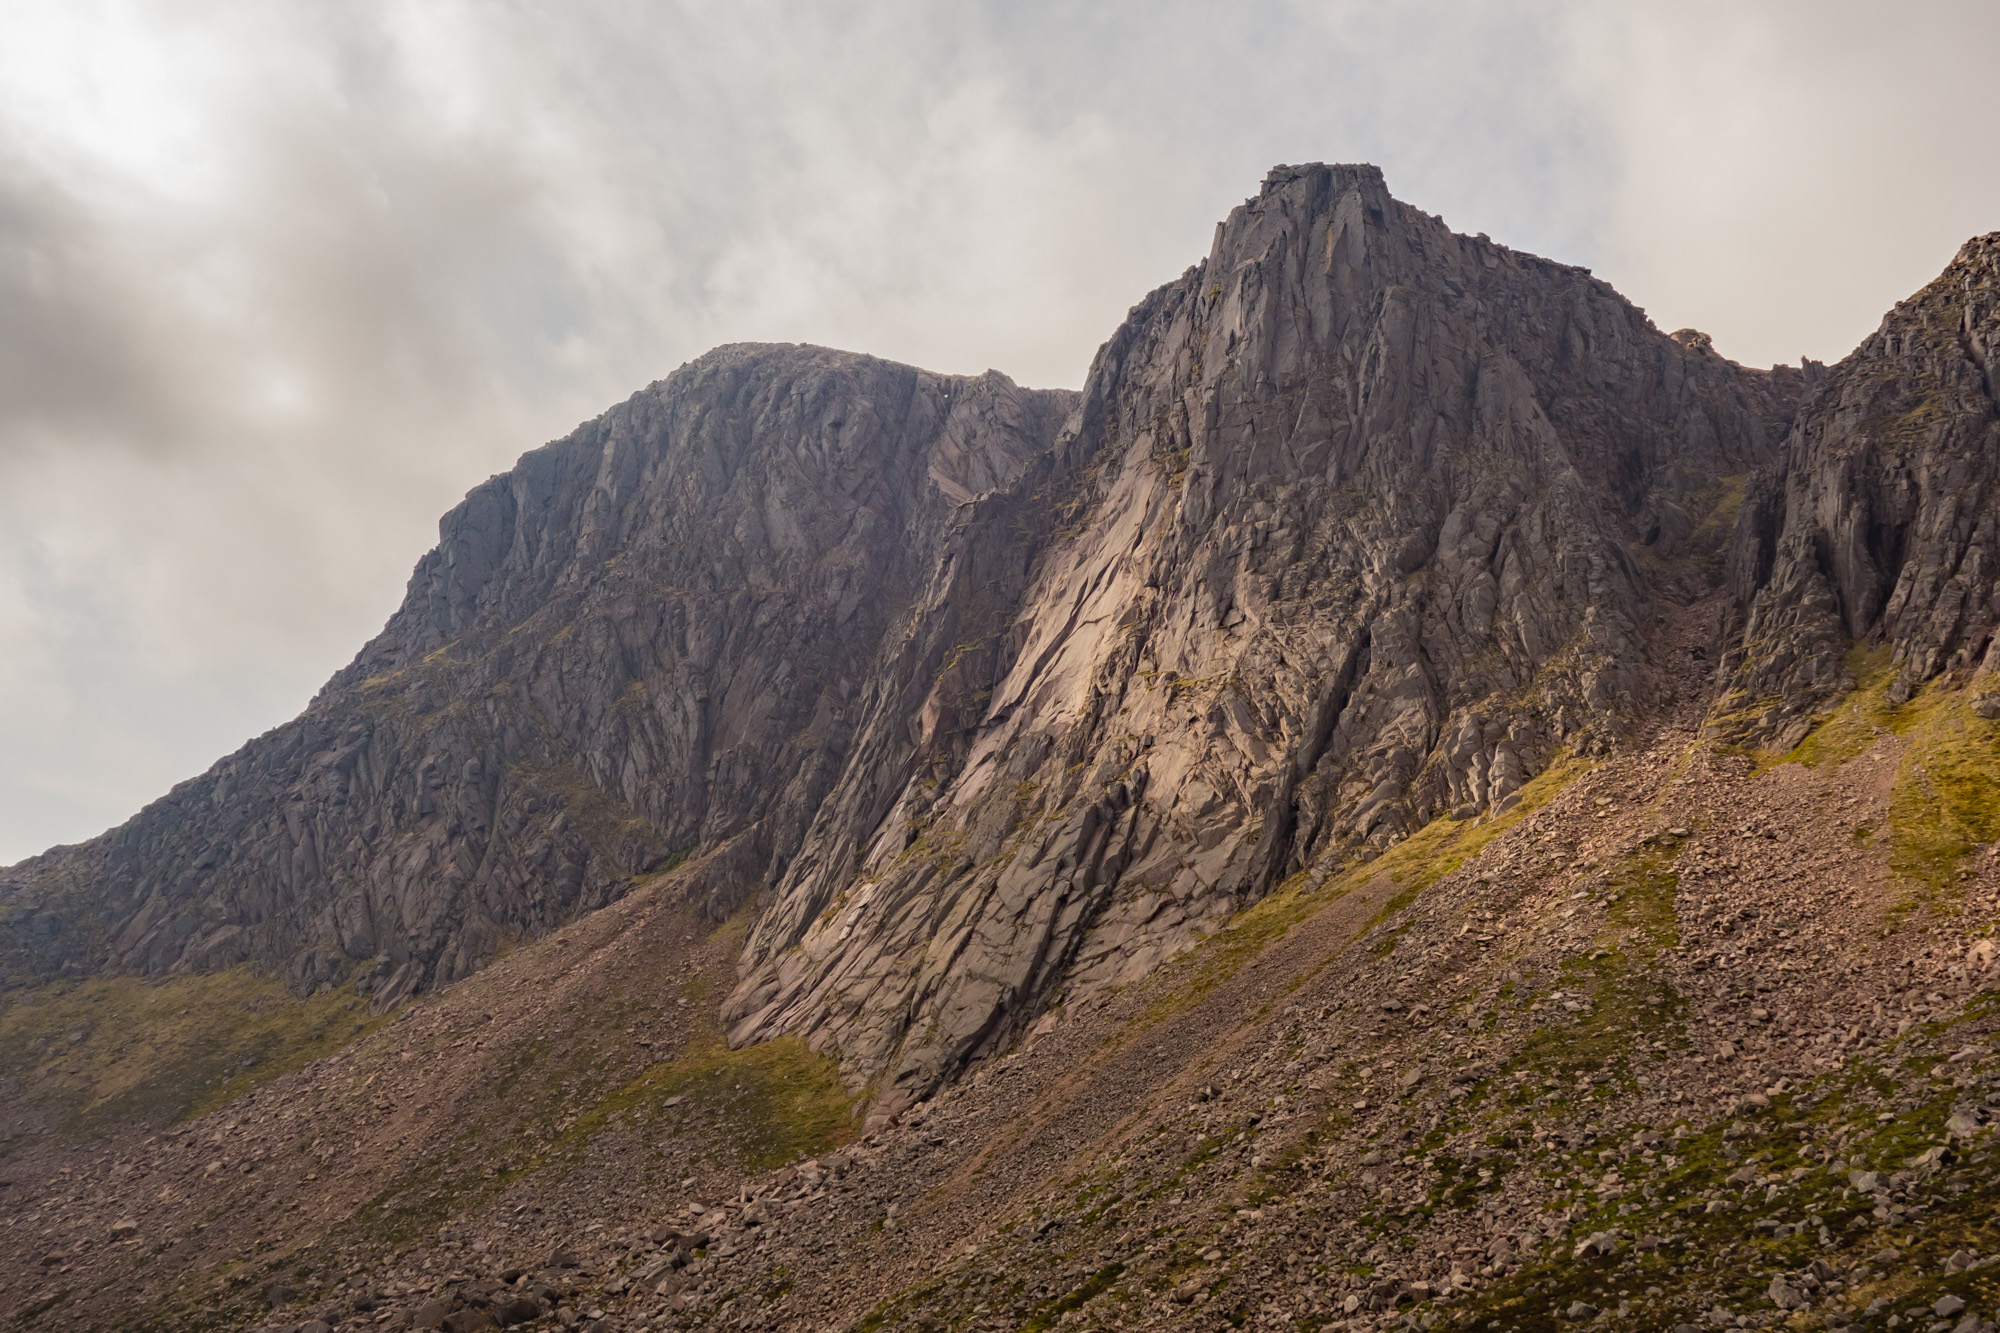 The giant sweep of the Shelterstone Crag with the Central Slabs highlighted by sun beams 